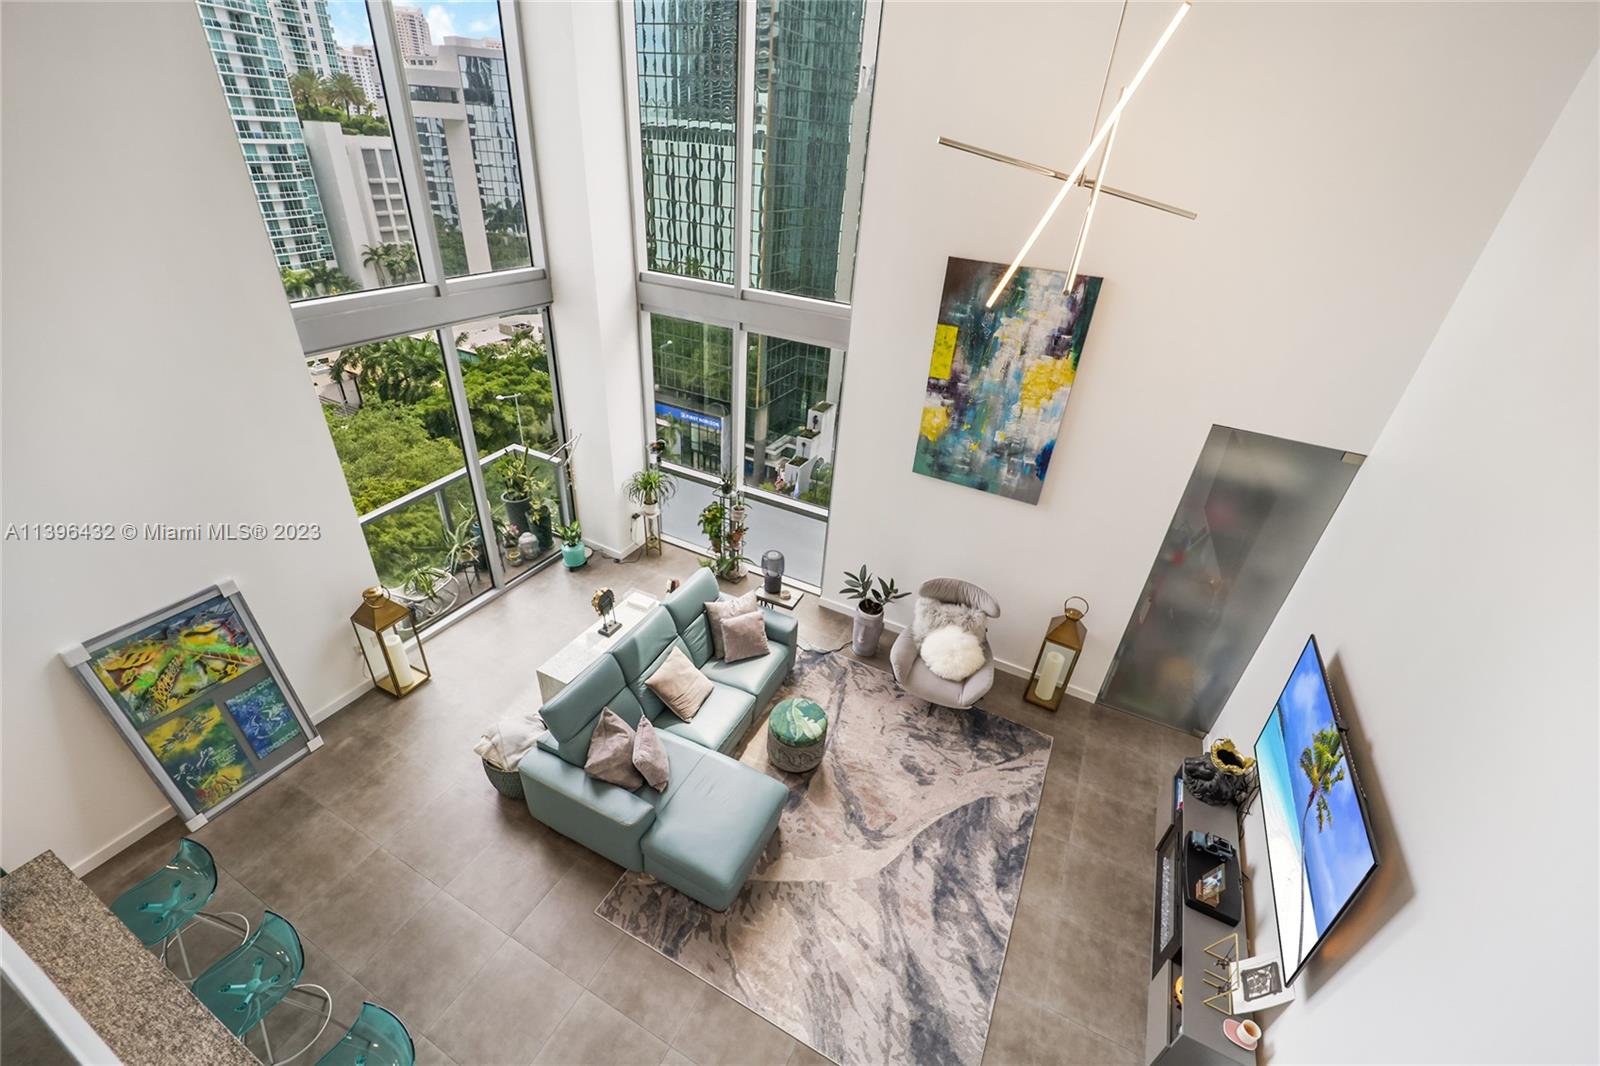 Welcome to 1060 Brickell Ave, a stunning loft unit in Miami's vibrant Brickell neighborhood. This 2-bedroom, 2-bathroom gem offers contemporary living space with high ceilings and ample natural light. The Italian-style kitchen and panoramic city views make every moment special. Conveniently located near Mary Brickell Village and transportation, this loft unit is a perfect blend of luxury, convenience, and breathtaking views. Don't miss the opportunity to experience the pinnacle of Miami living. Contact us for a private showing today!